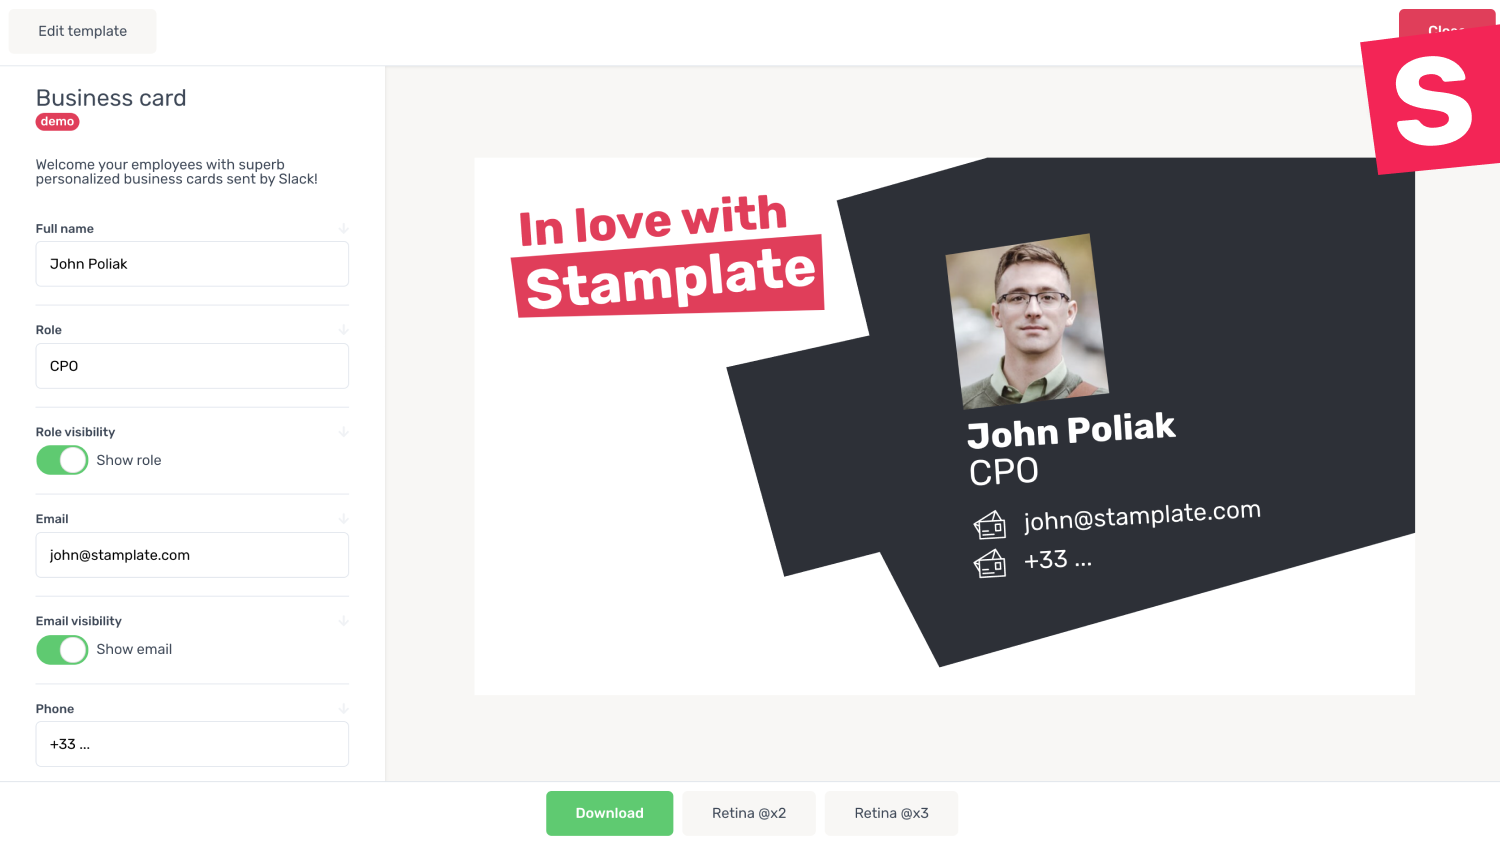 Stamplate - Generate custom images directly on our interface